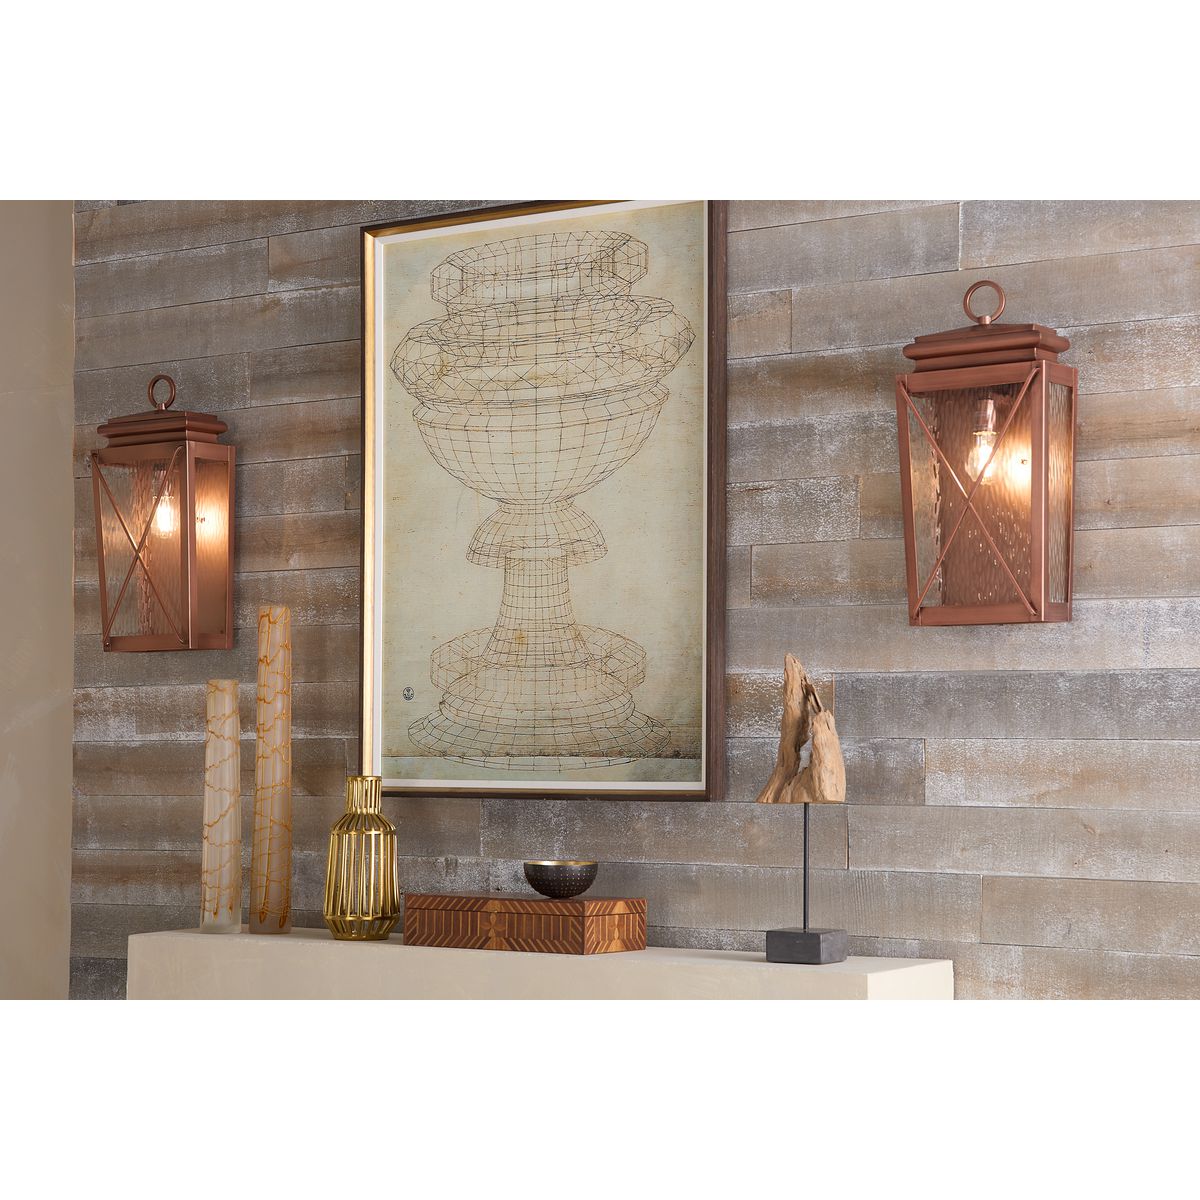 Florence Antique Style Solid Copper Outdoor Wall Light E26